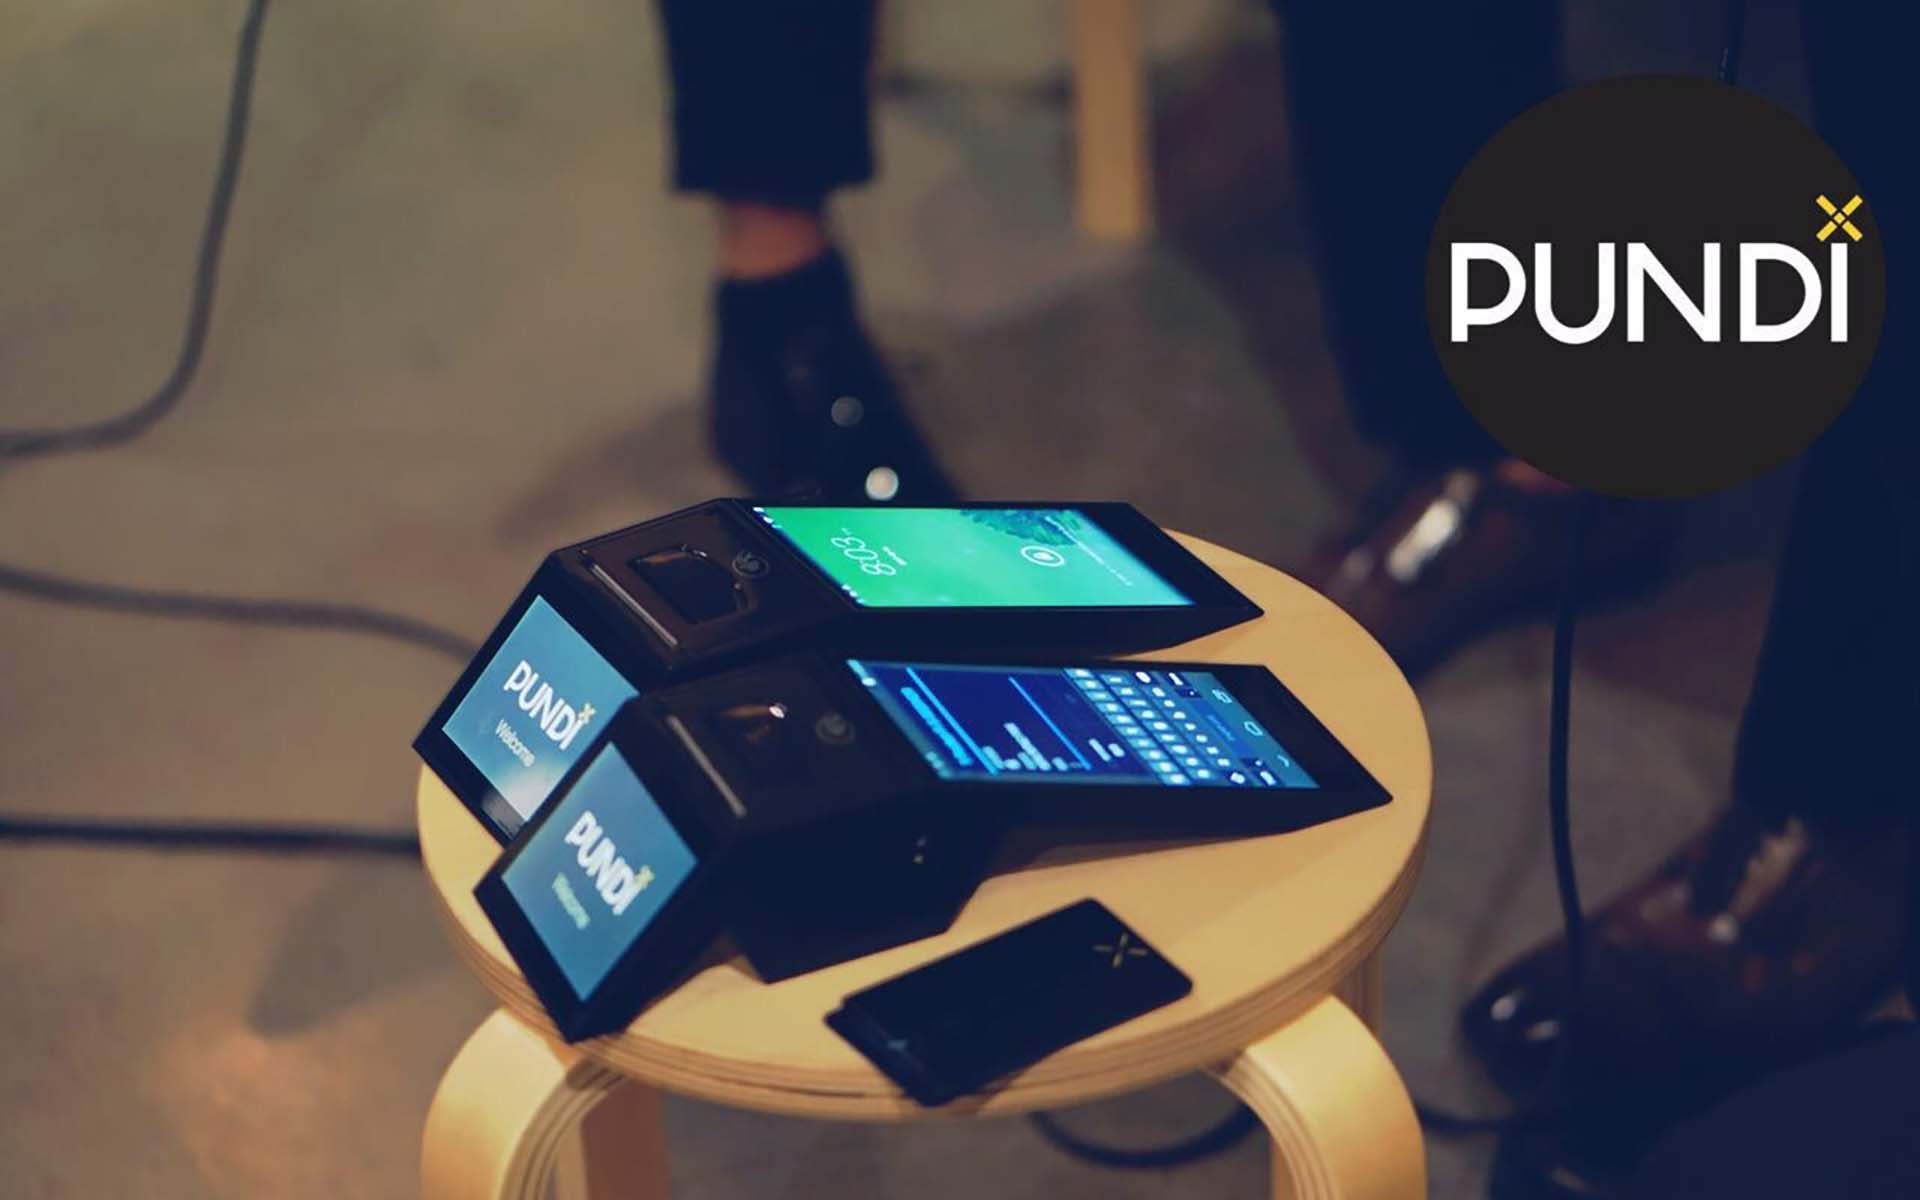 Pundi X Boosts ICO with Offer of First Cryptocurrency POS Device Free to Early Investors